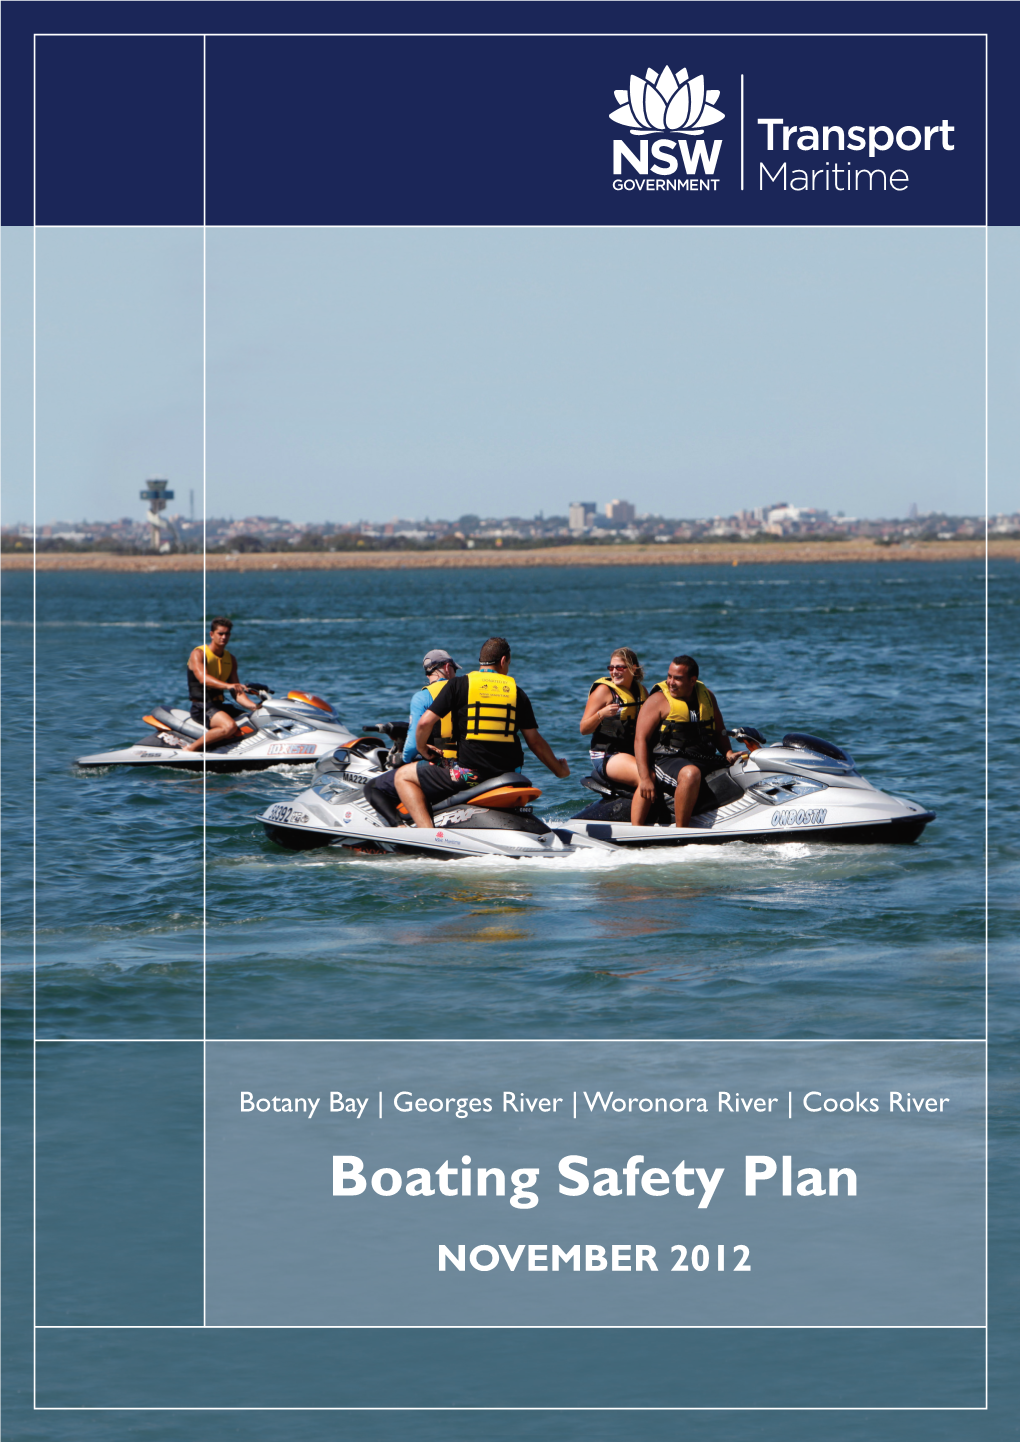 Cooks River Boating Safety Plan NOVEMBER 2012 Prepared by the Ofﬁ Ce of Boating Safety and Maritime Affairs Policy and Regulation Division Transport for NSW